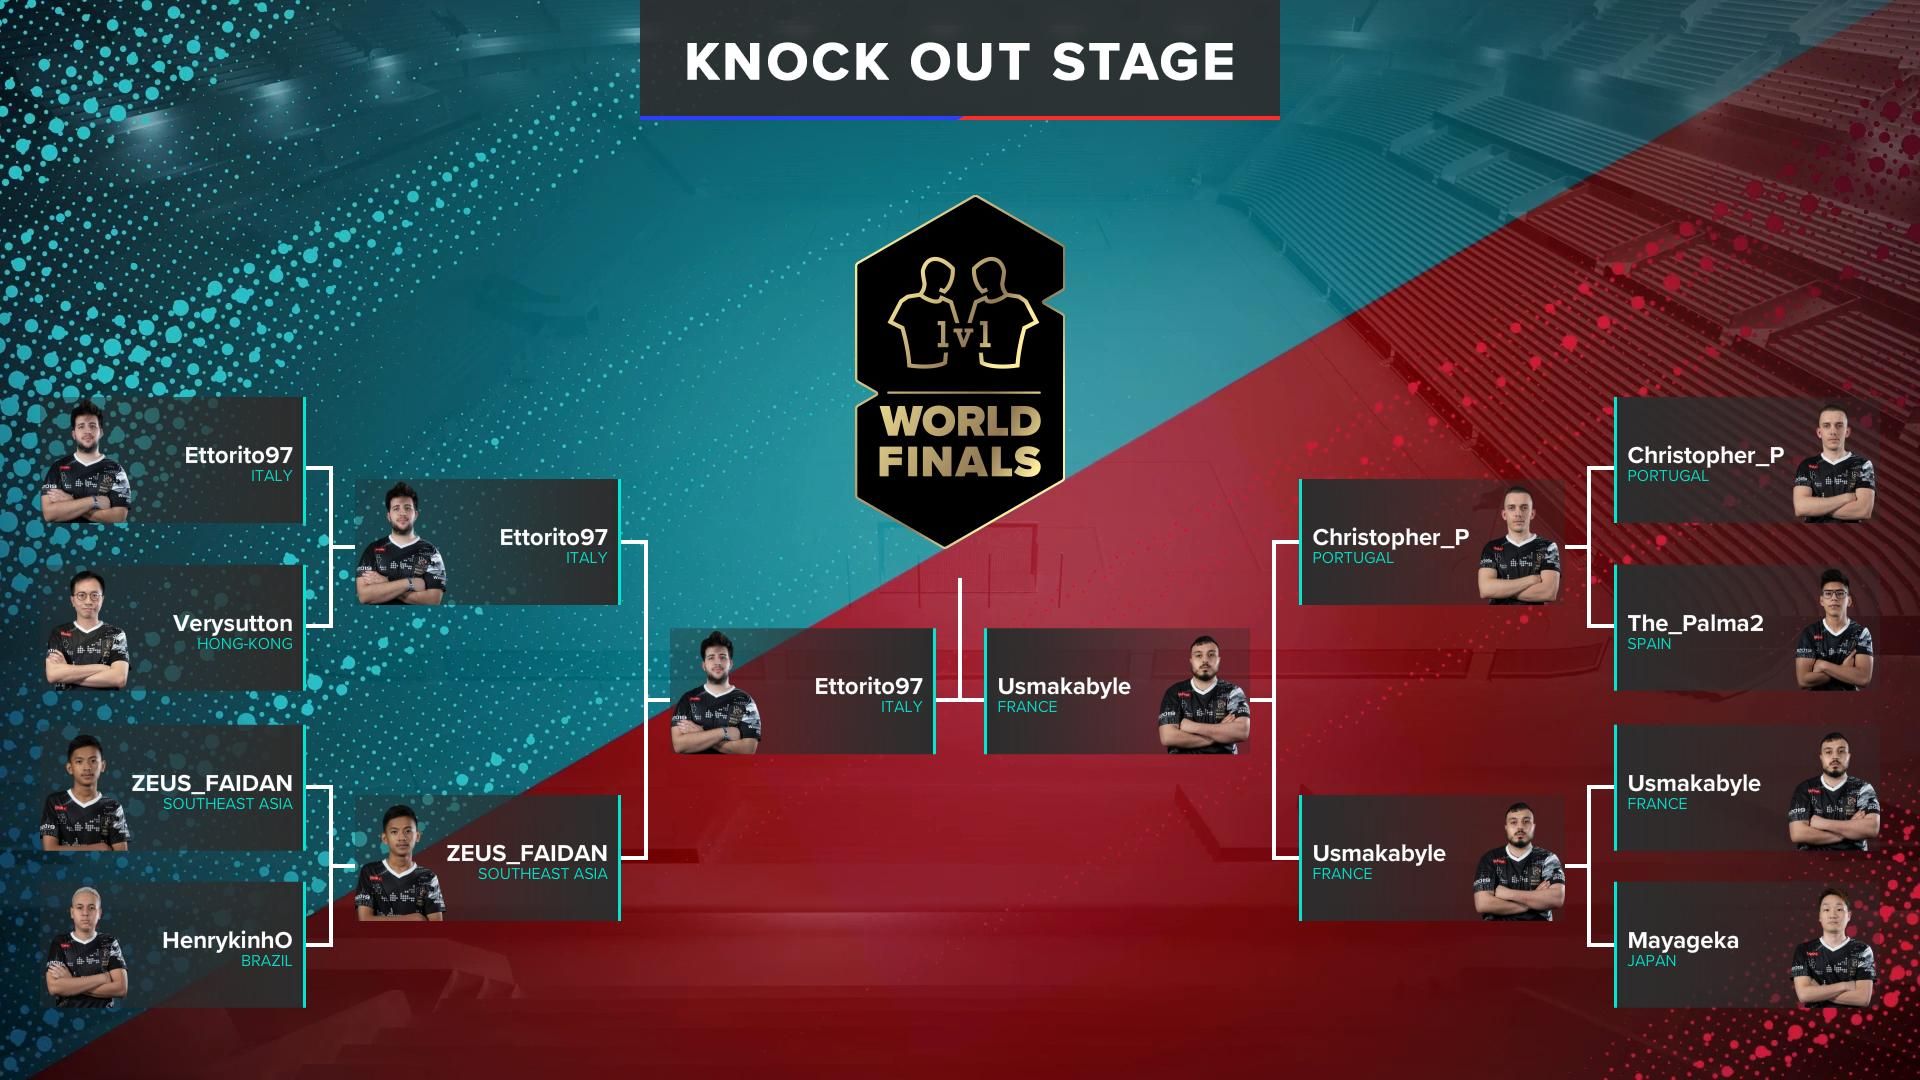 Fase knock out PES League 2019 World Final